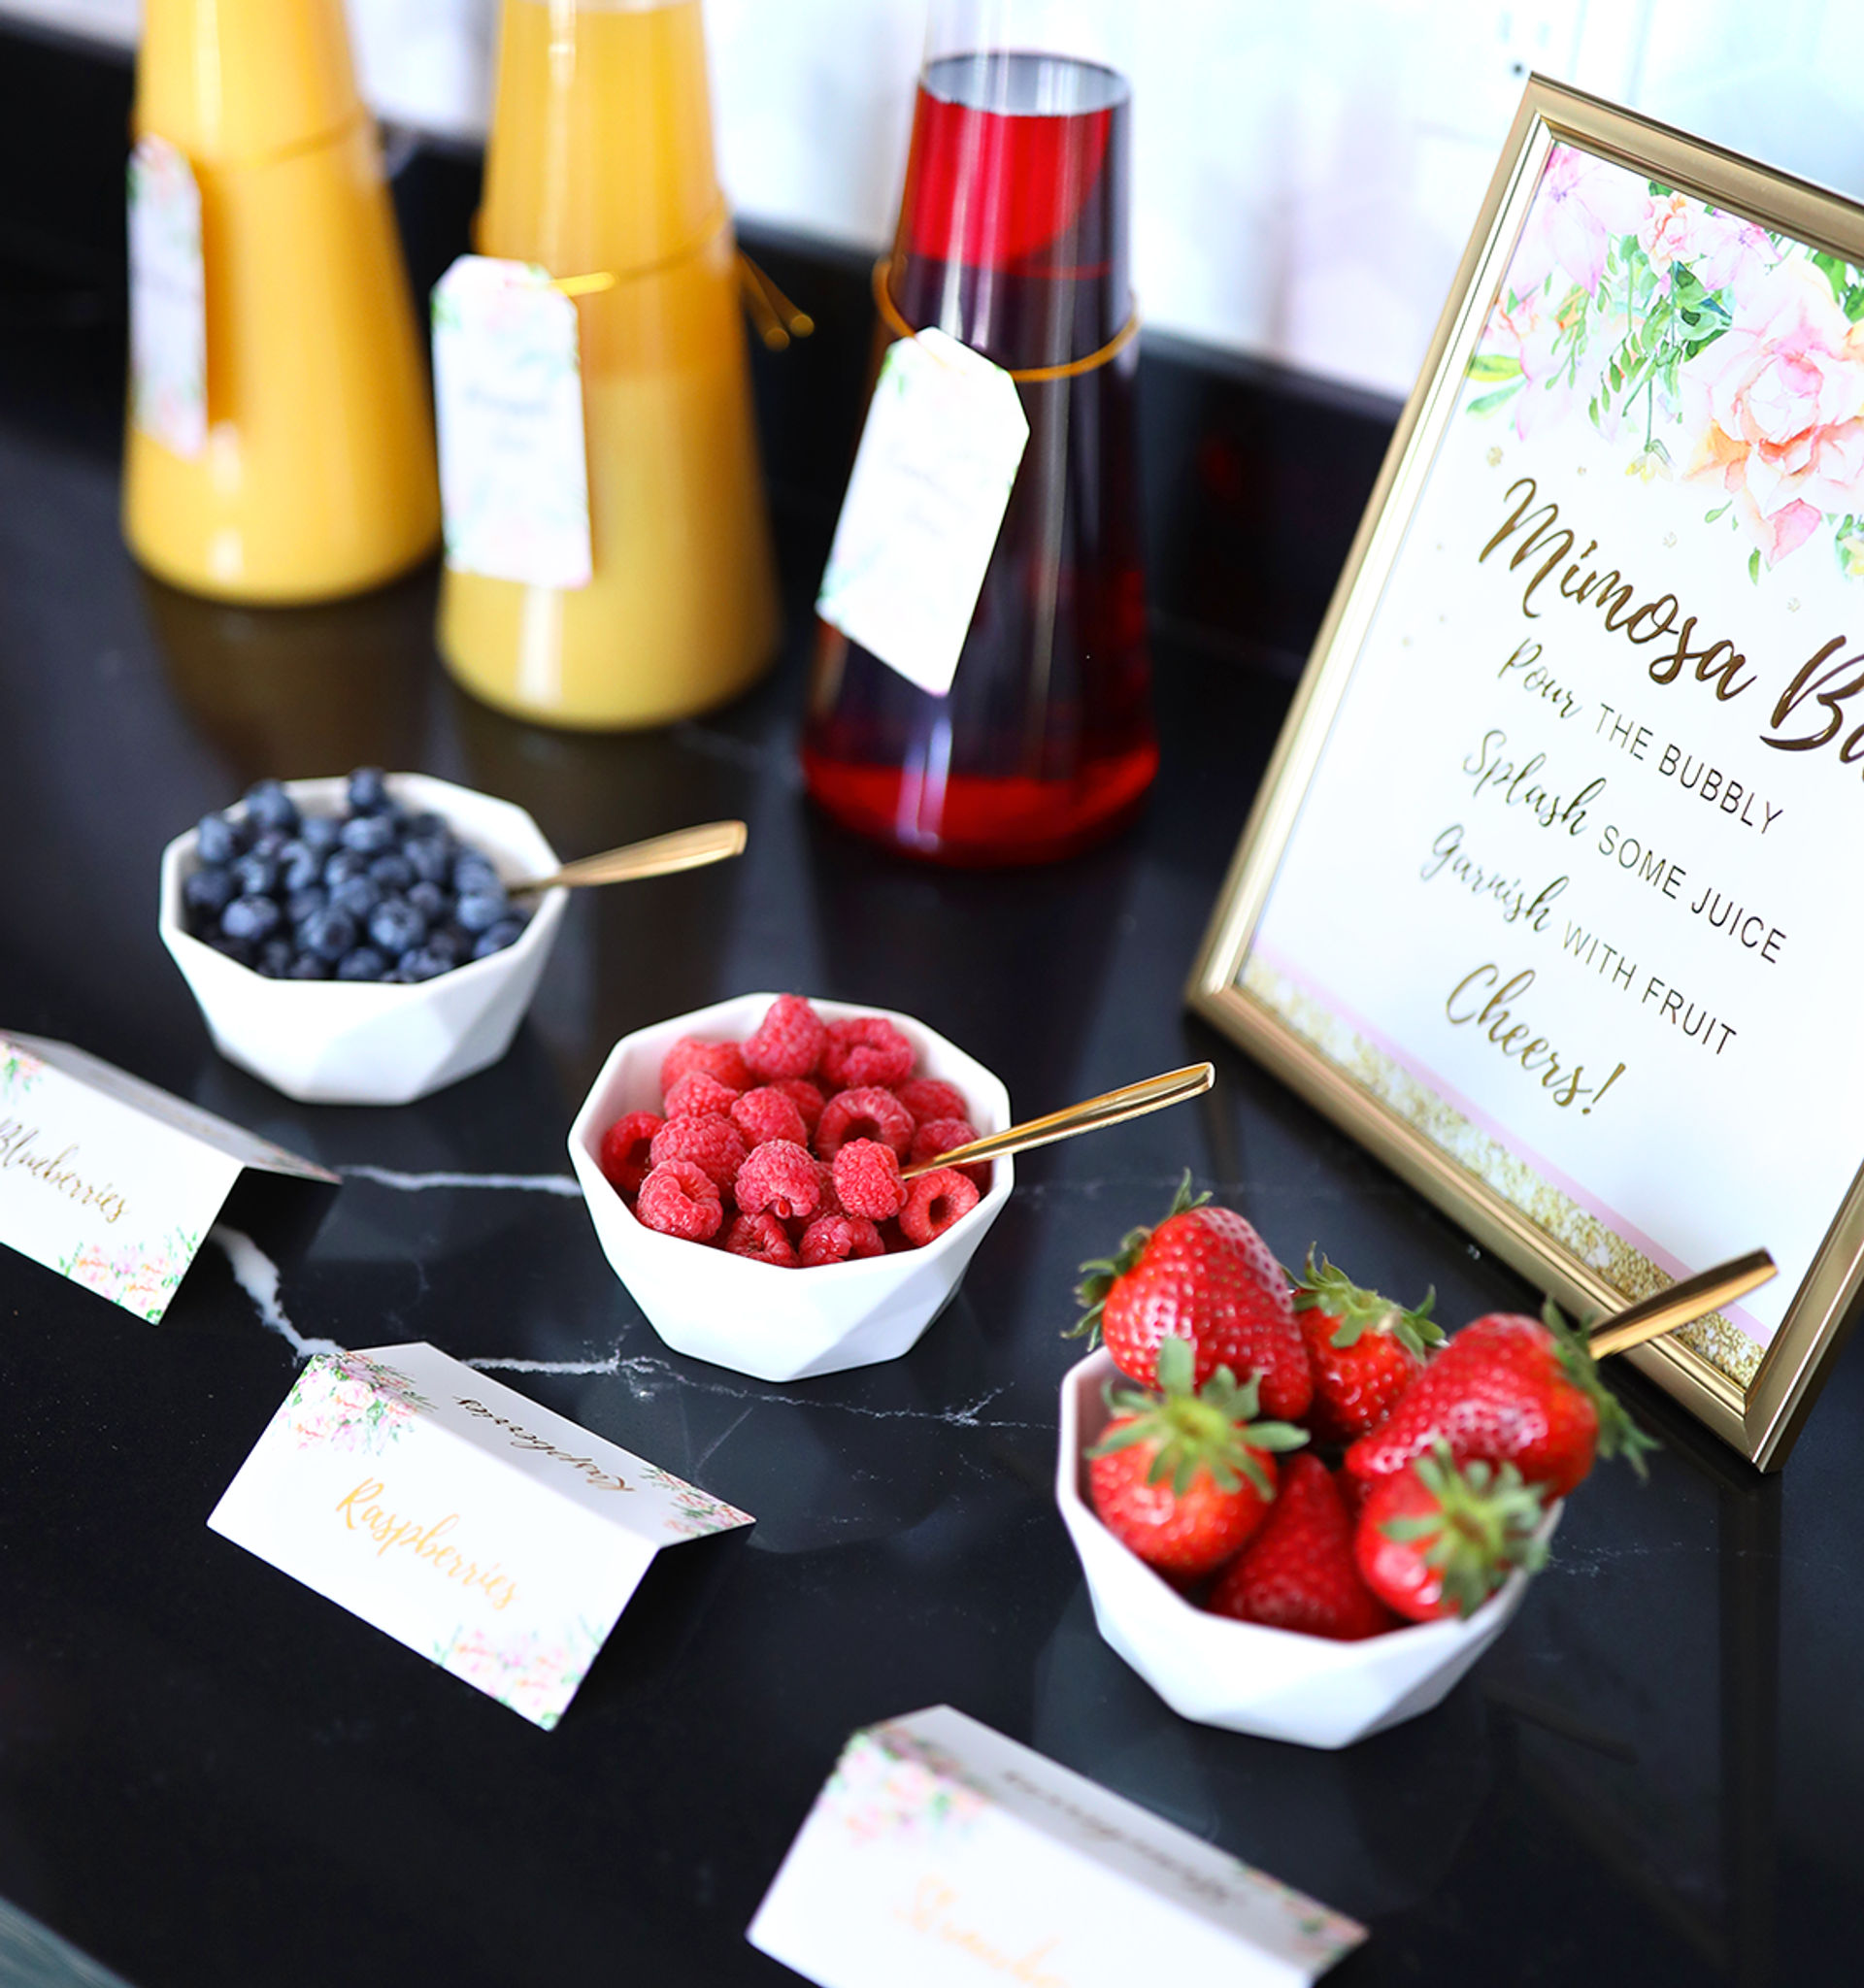 Mimosa Bar with Strawberries and Blueberries, Open Bar Wedding Bar